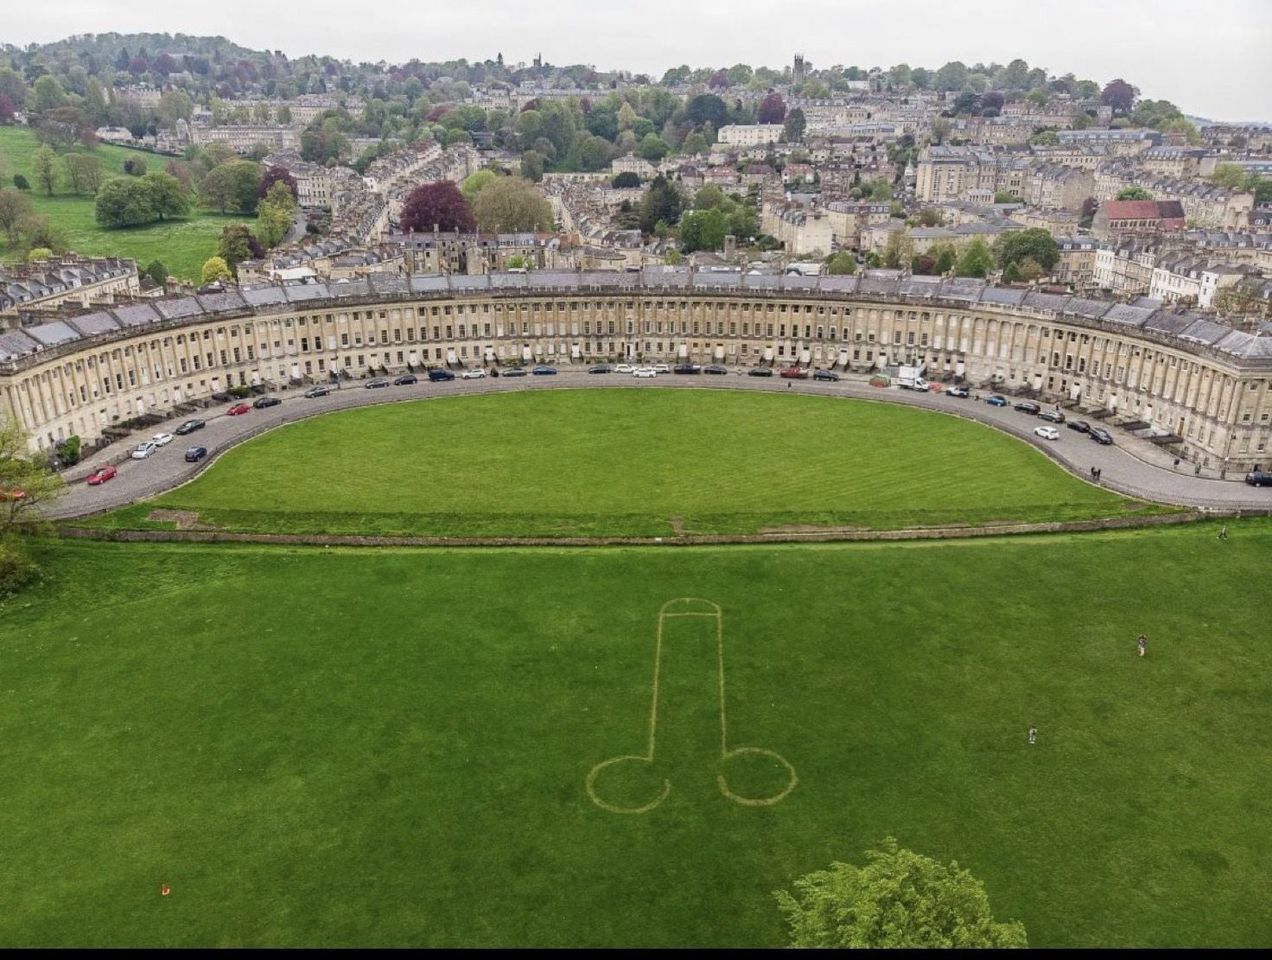 A giant penis has been mowed into the lawn at King Charles coronation party location